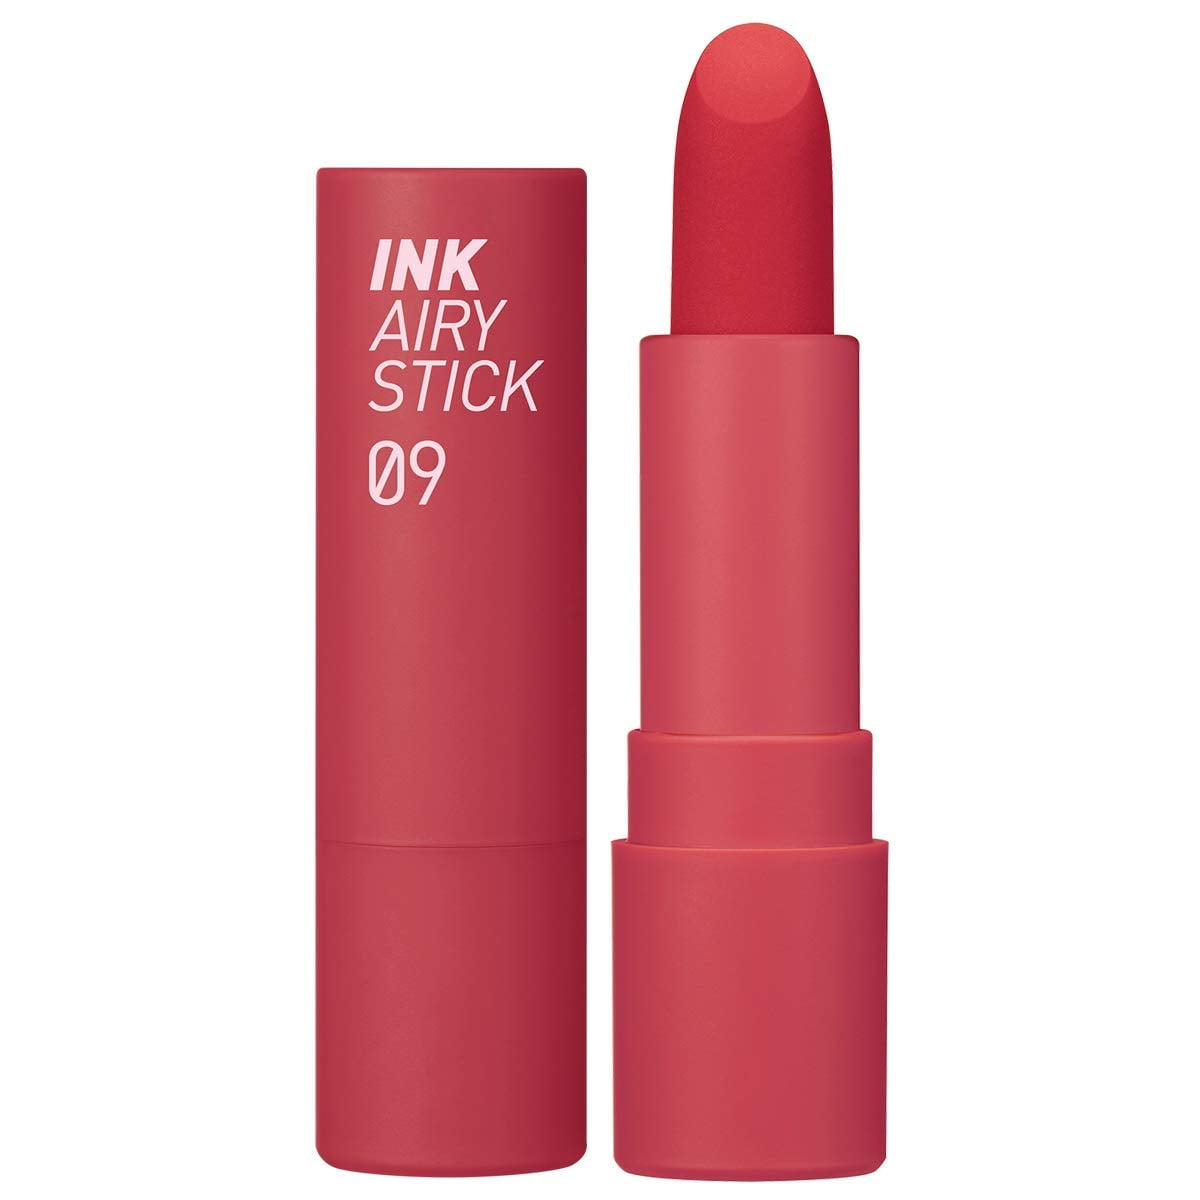 PERIPERA ] Ink the Airy Velvet Stick 009 Emotional Red 3.6 g (0.12